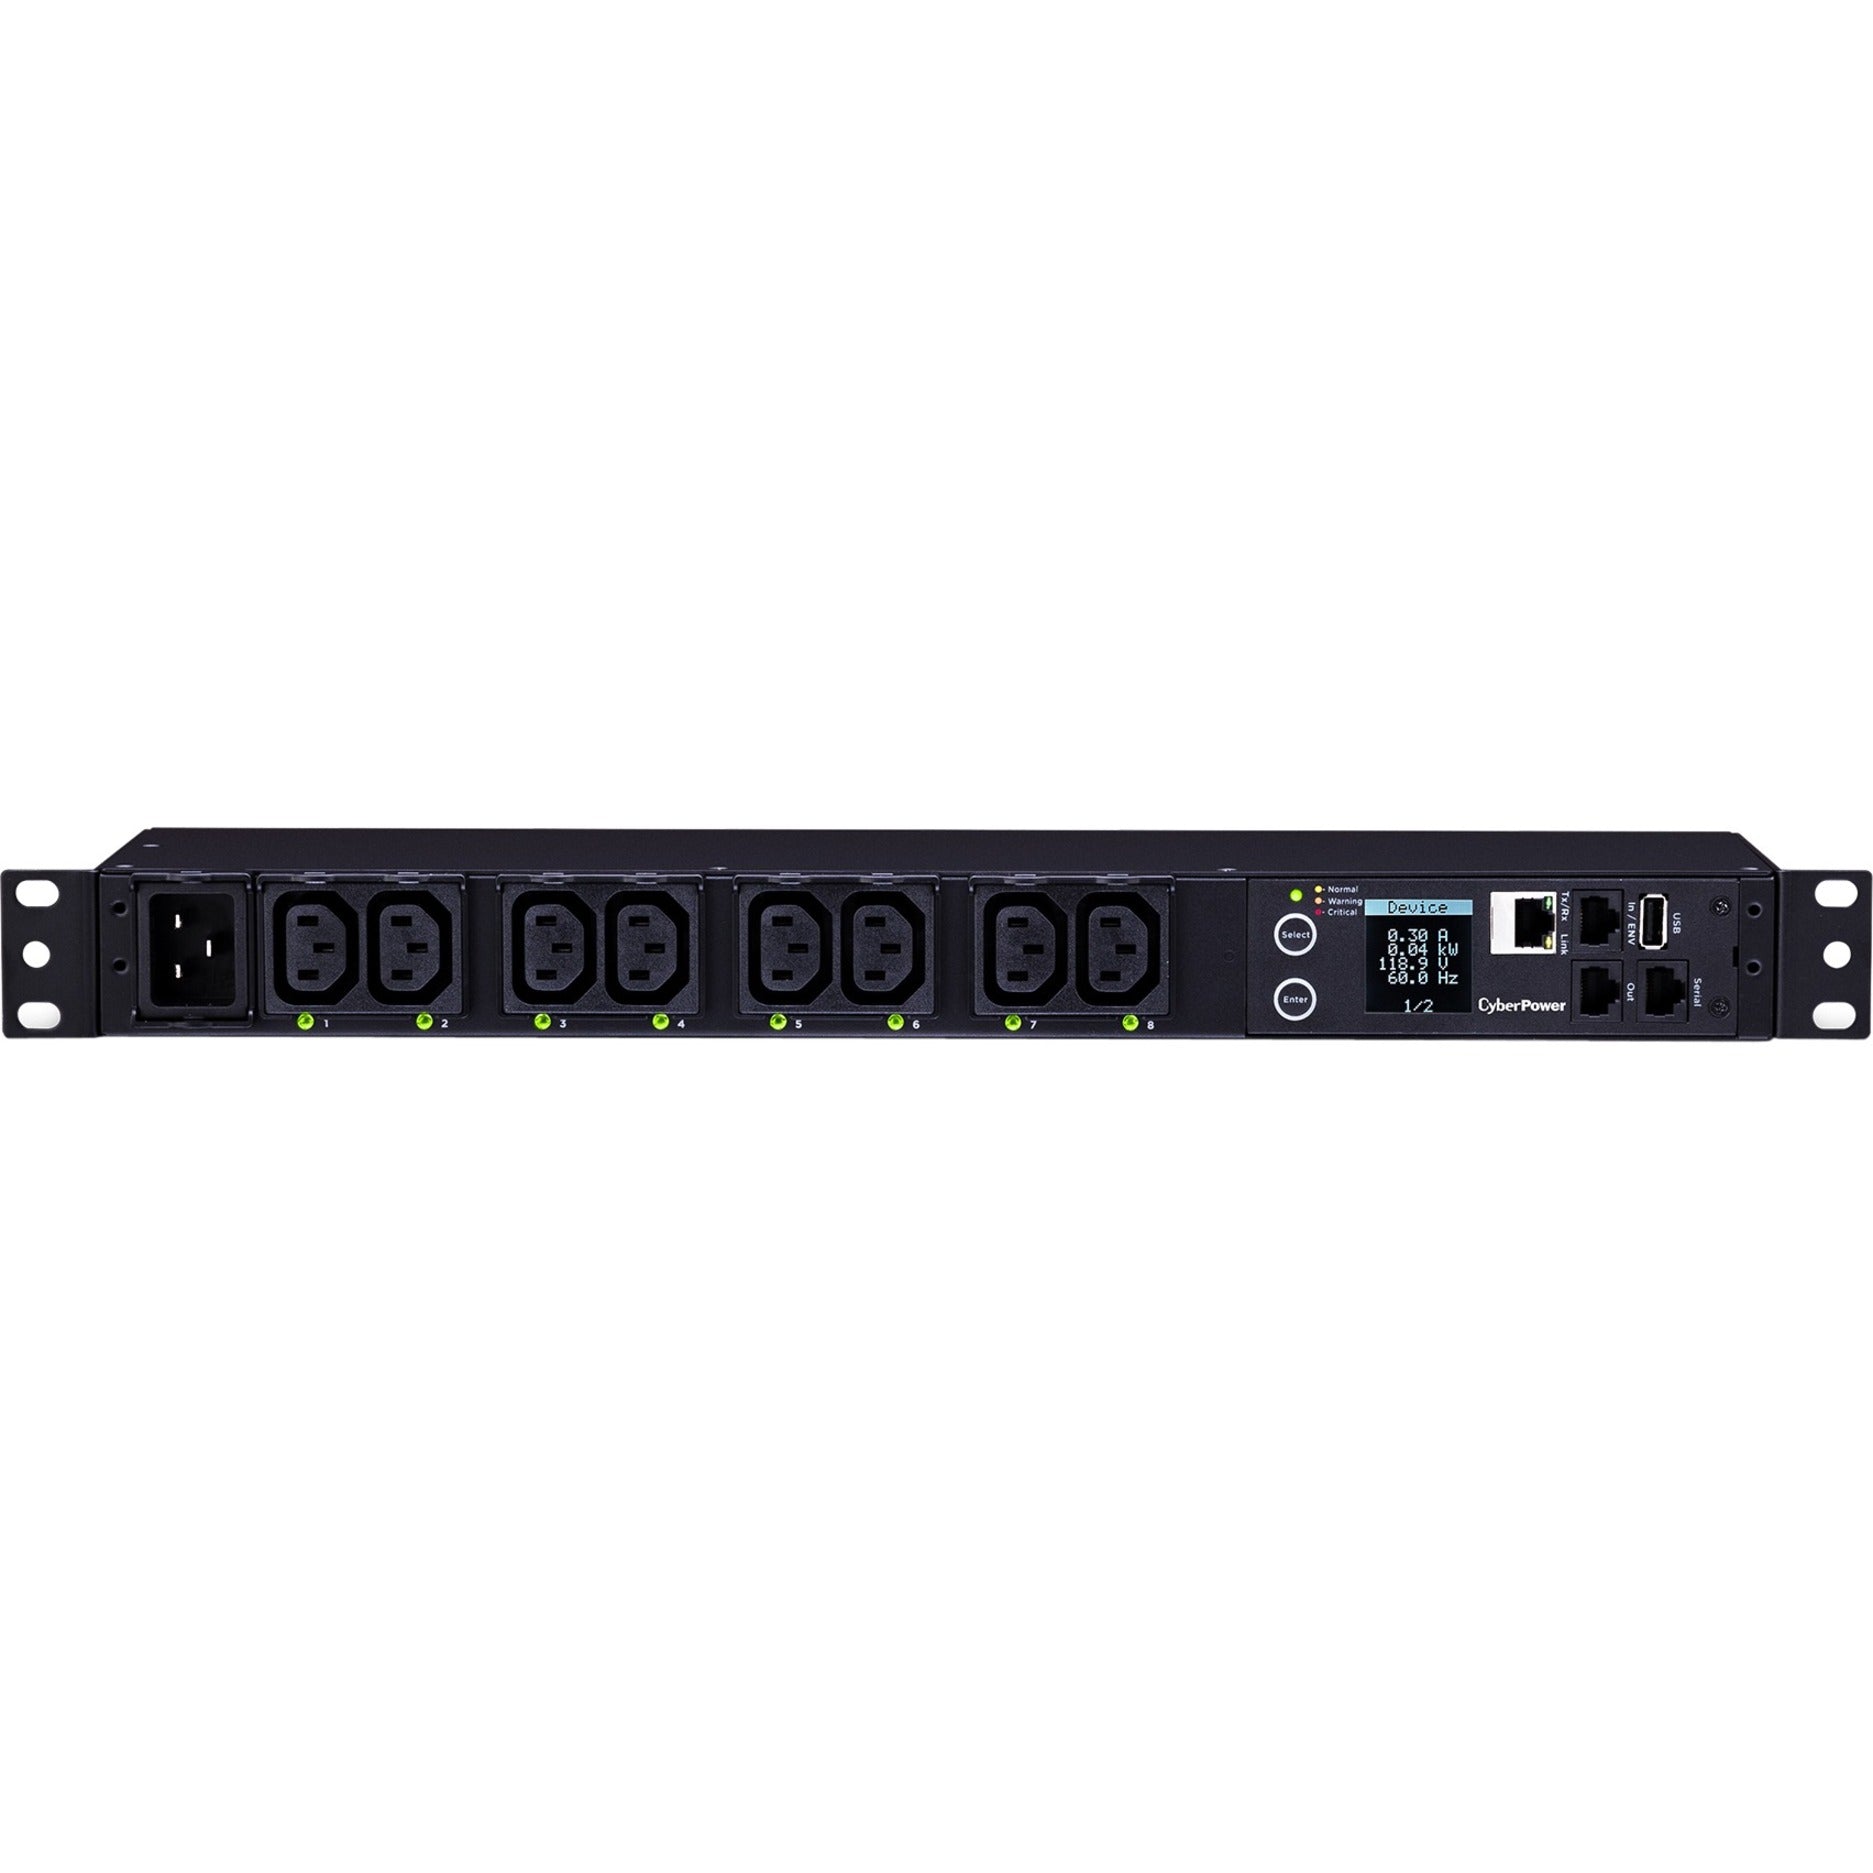 CyberPower PDU81005 8-Outlet PDU, 100-120VAC 20A Switched Metered-by-Outlet PDU